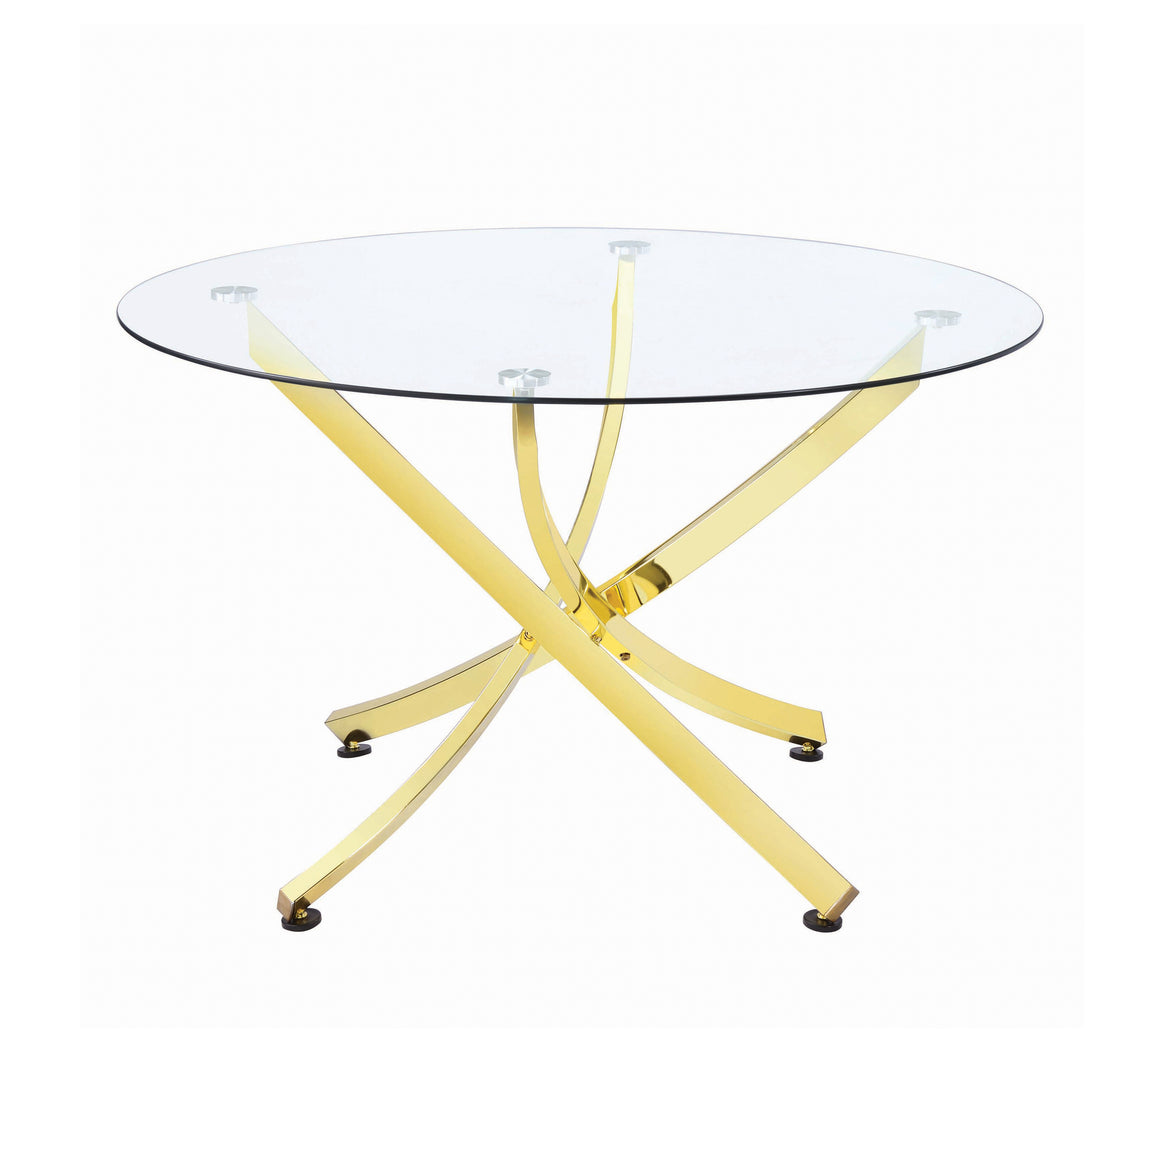 Chanel Round Dining Table Set